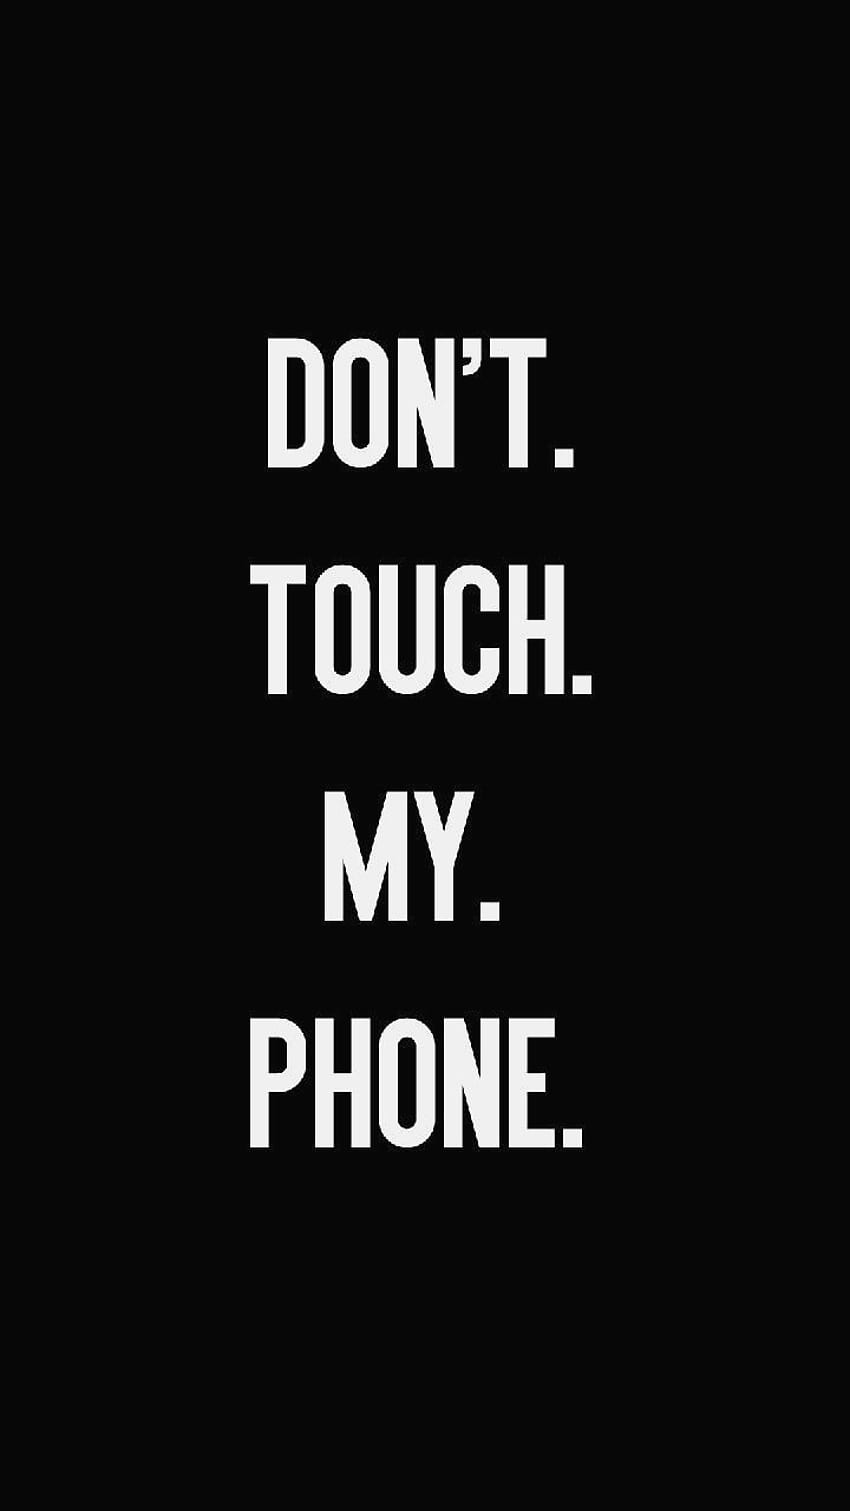 Don T Touch My Phone Live posted by ミシェル・ペルティエ, naruto do not touch my phone HD電話の壁紙